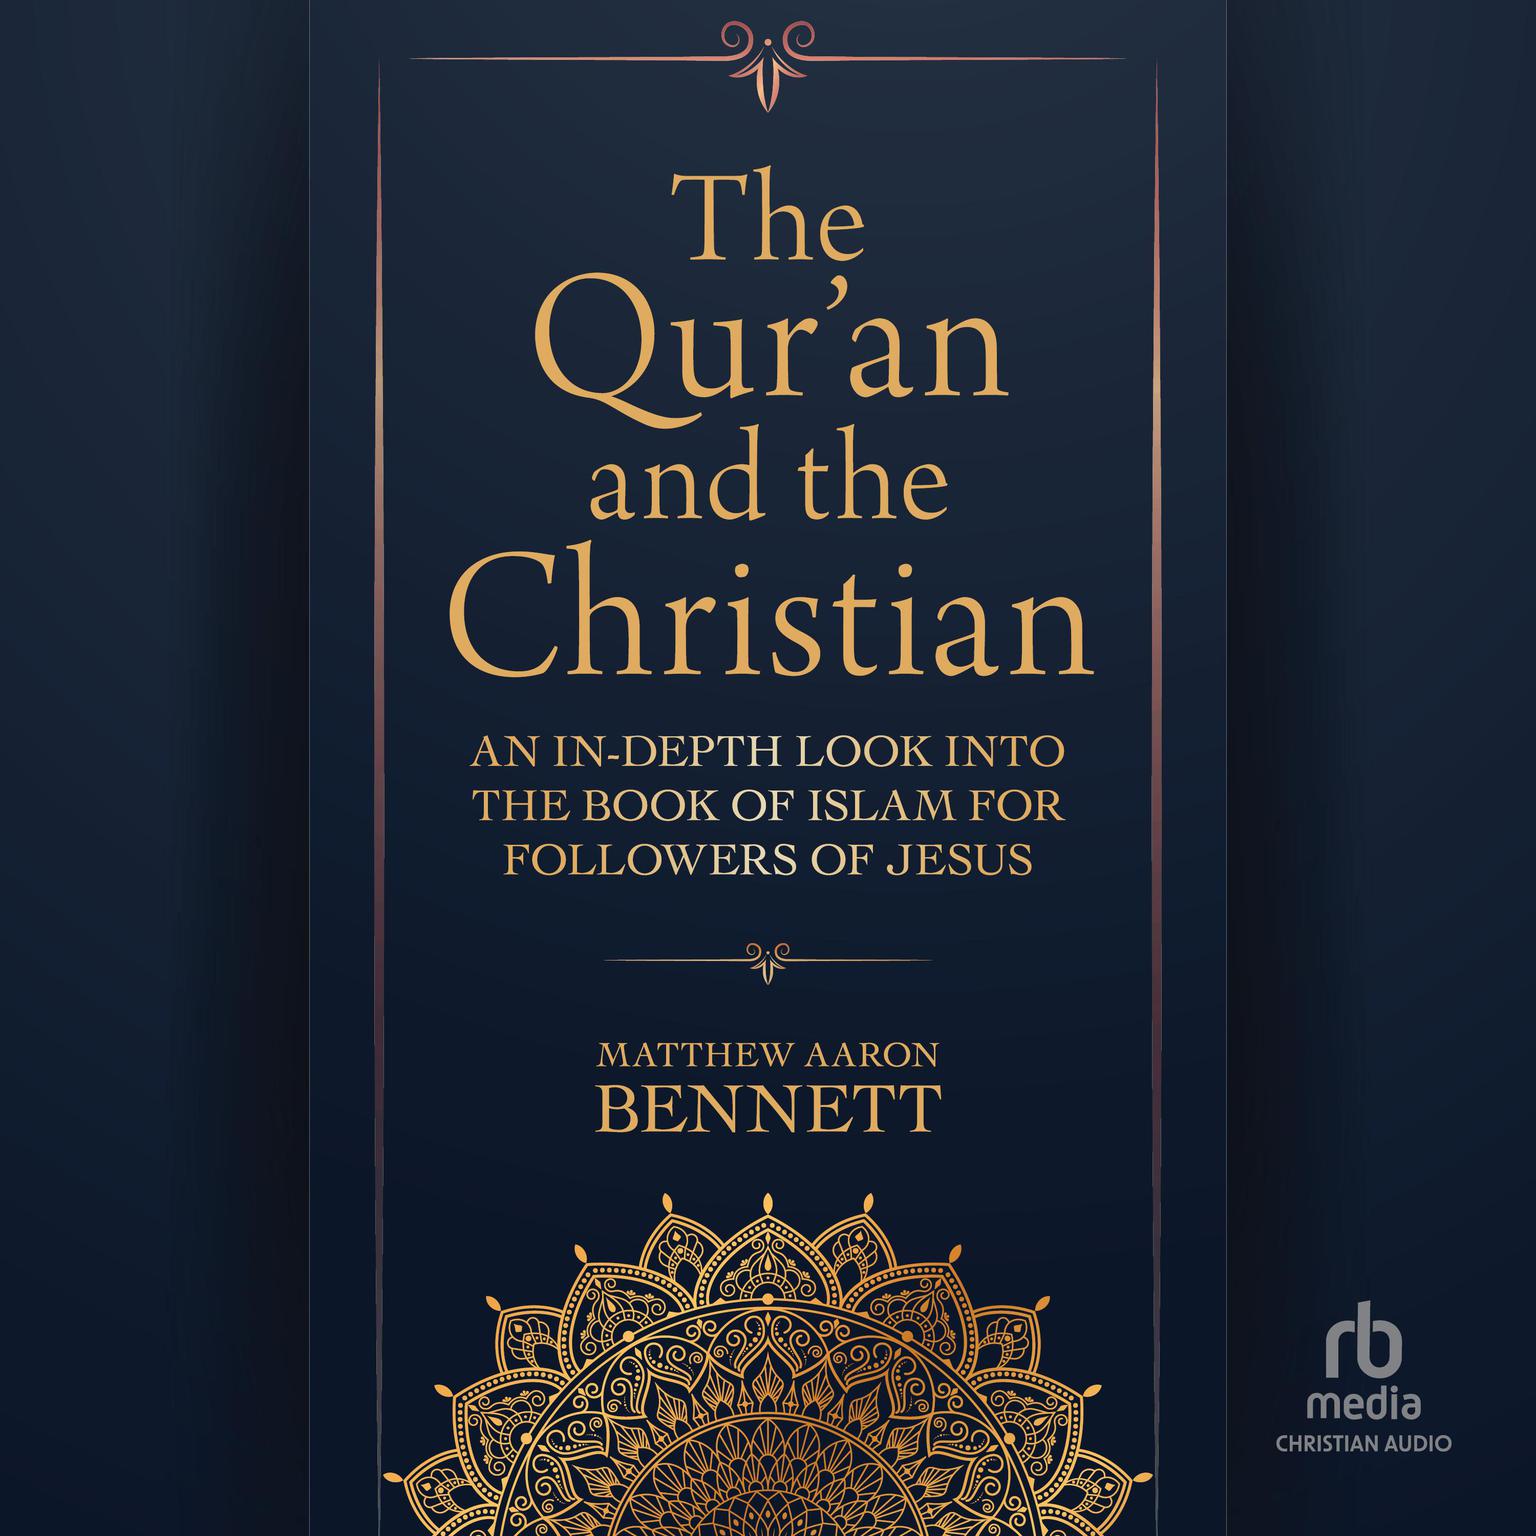 The Quran and the Christian: An In-Depth Look into the Book of Islam for Followers of Jesus Audiobook, by Matthew Aaron Bennett